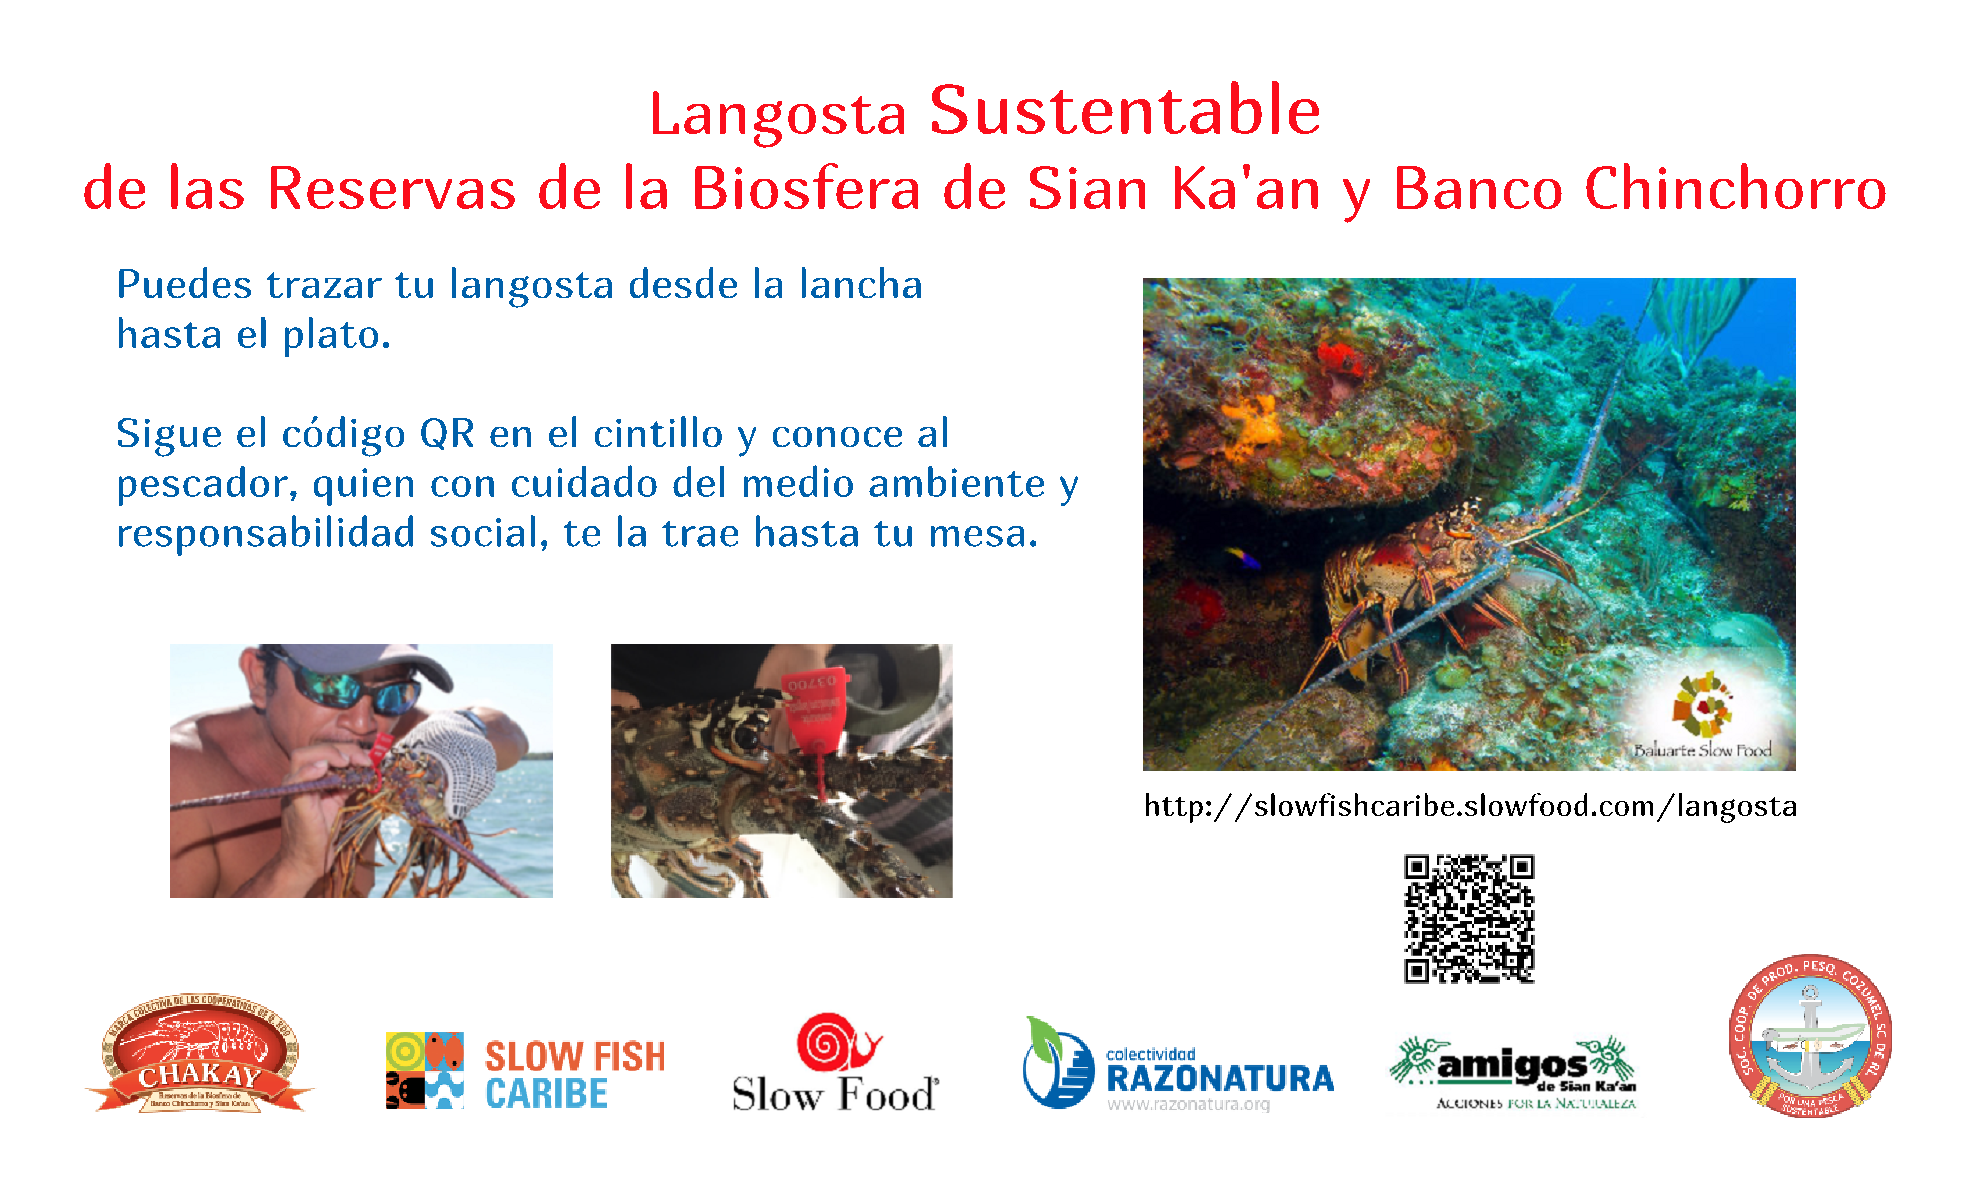 Sustainable lobsters in the biosphere reserves of Sian Ka’an and Banco Chinchorro